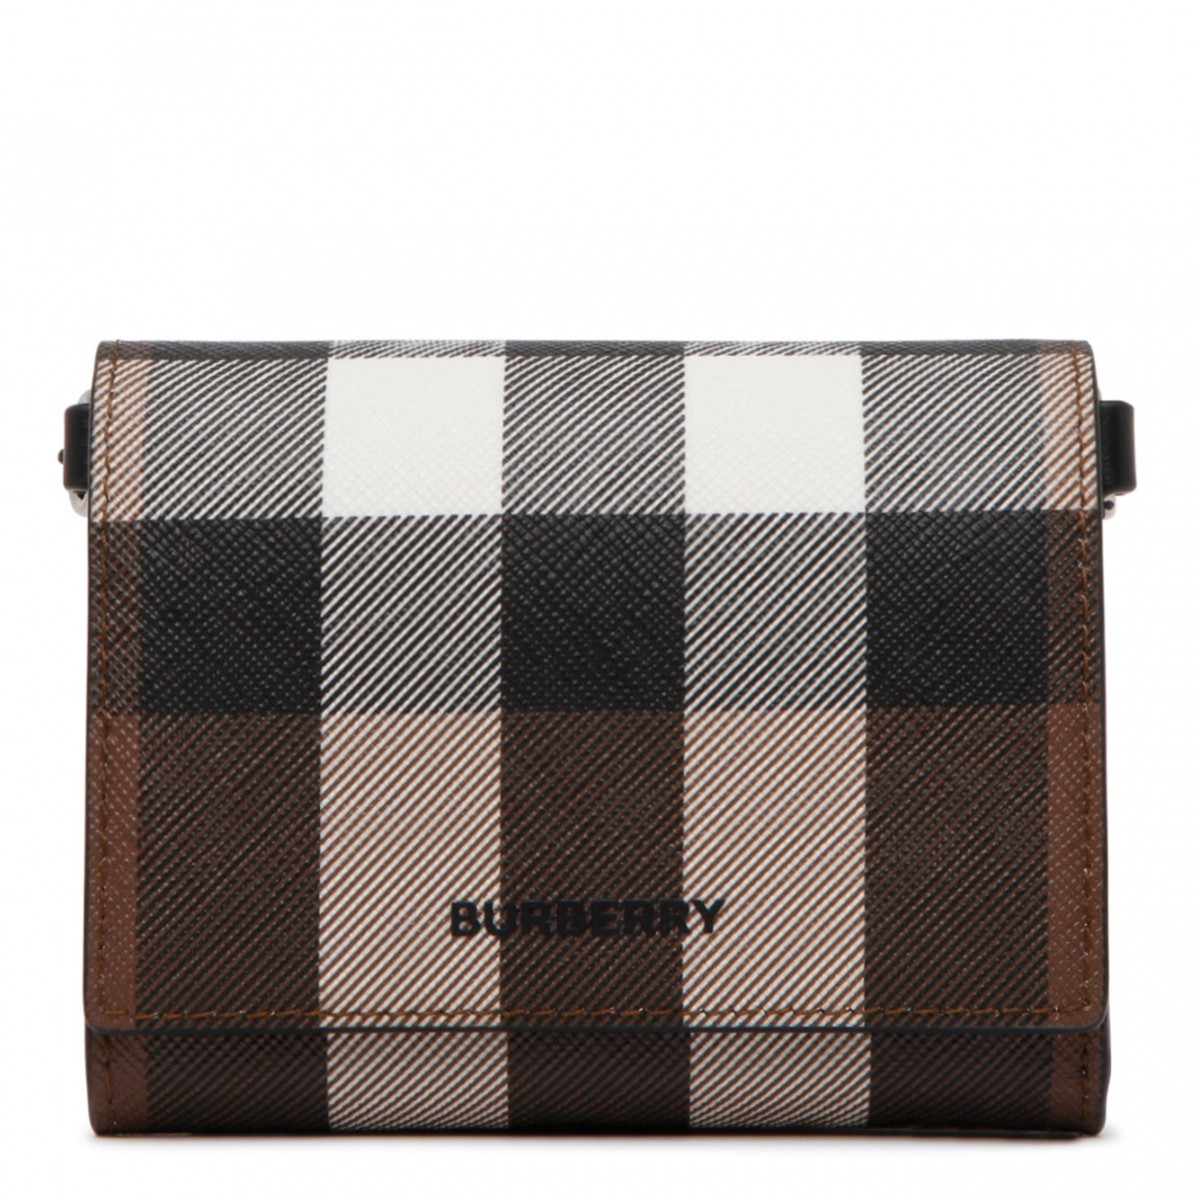 Burberry Leather Printed Wallet